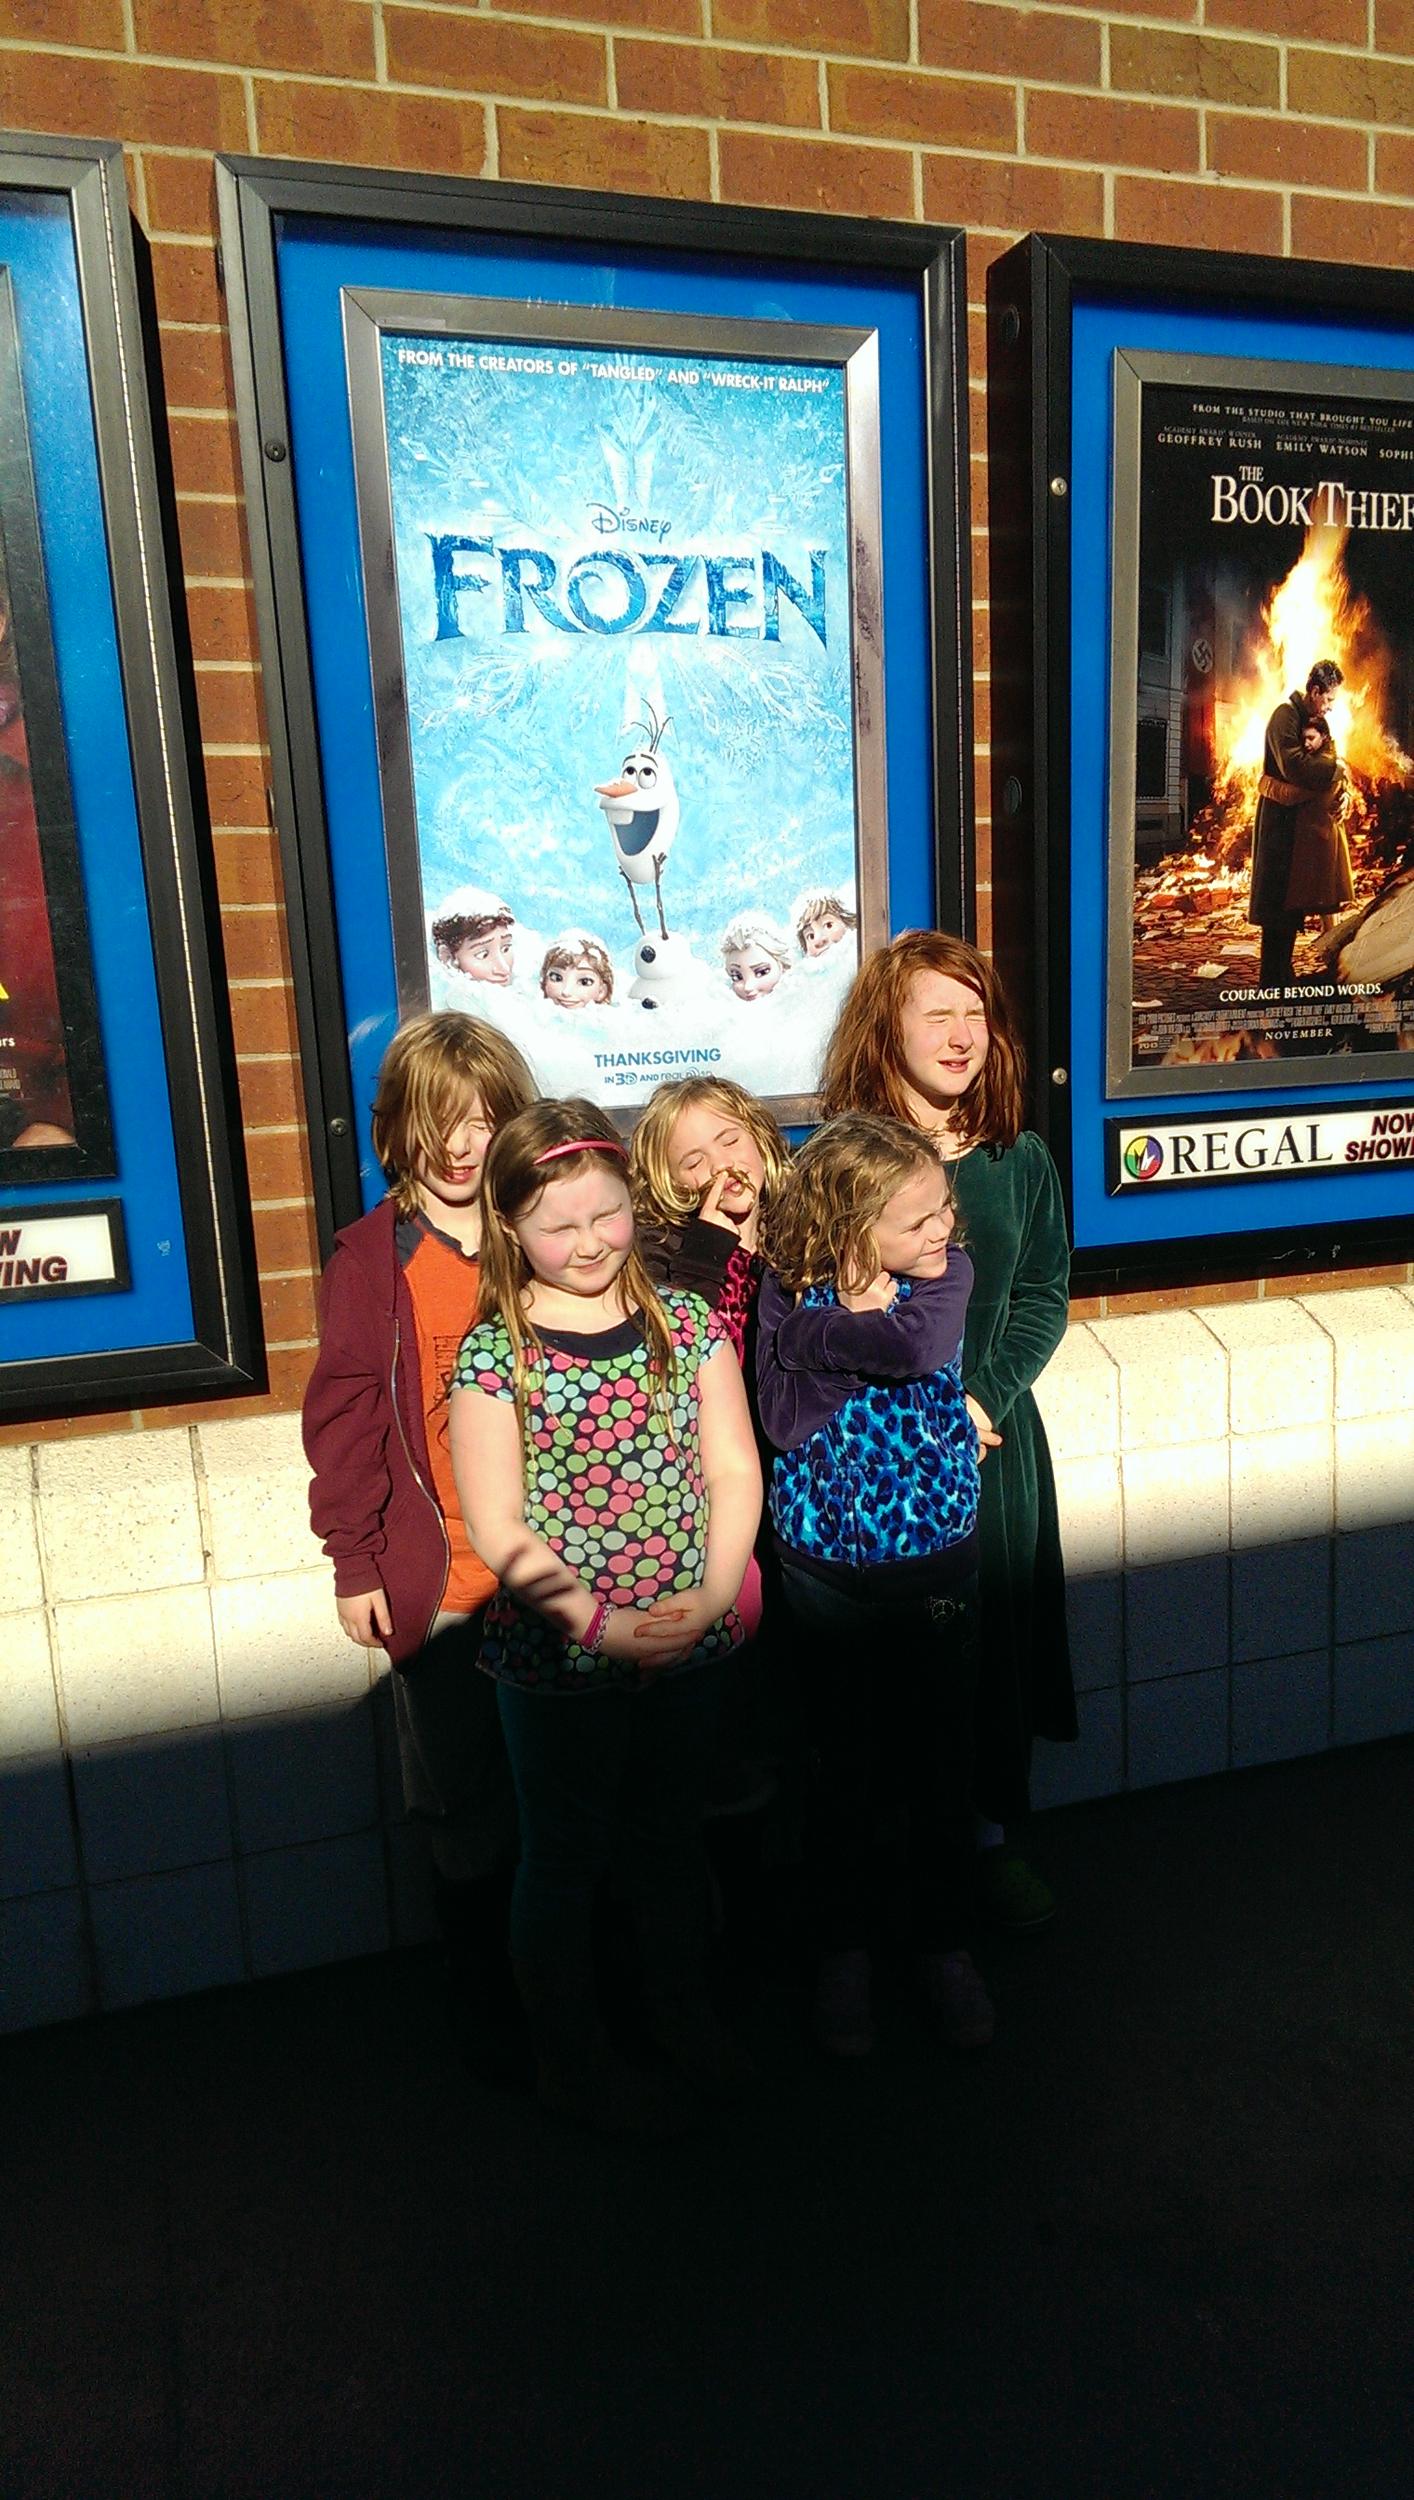 It was sunny, but freezing, when we saw Frozen.